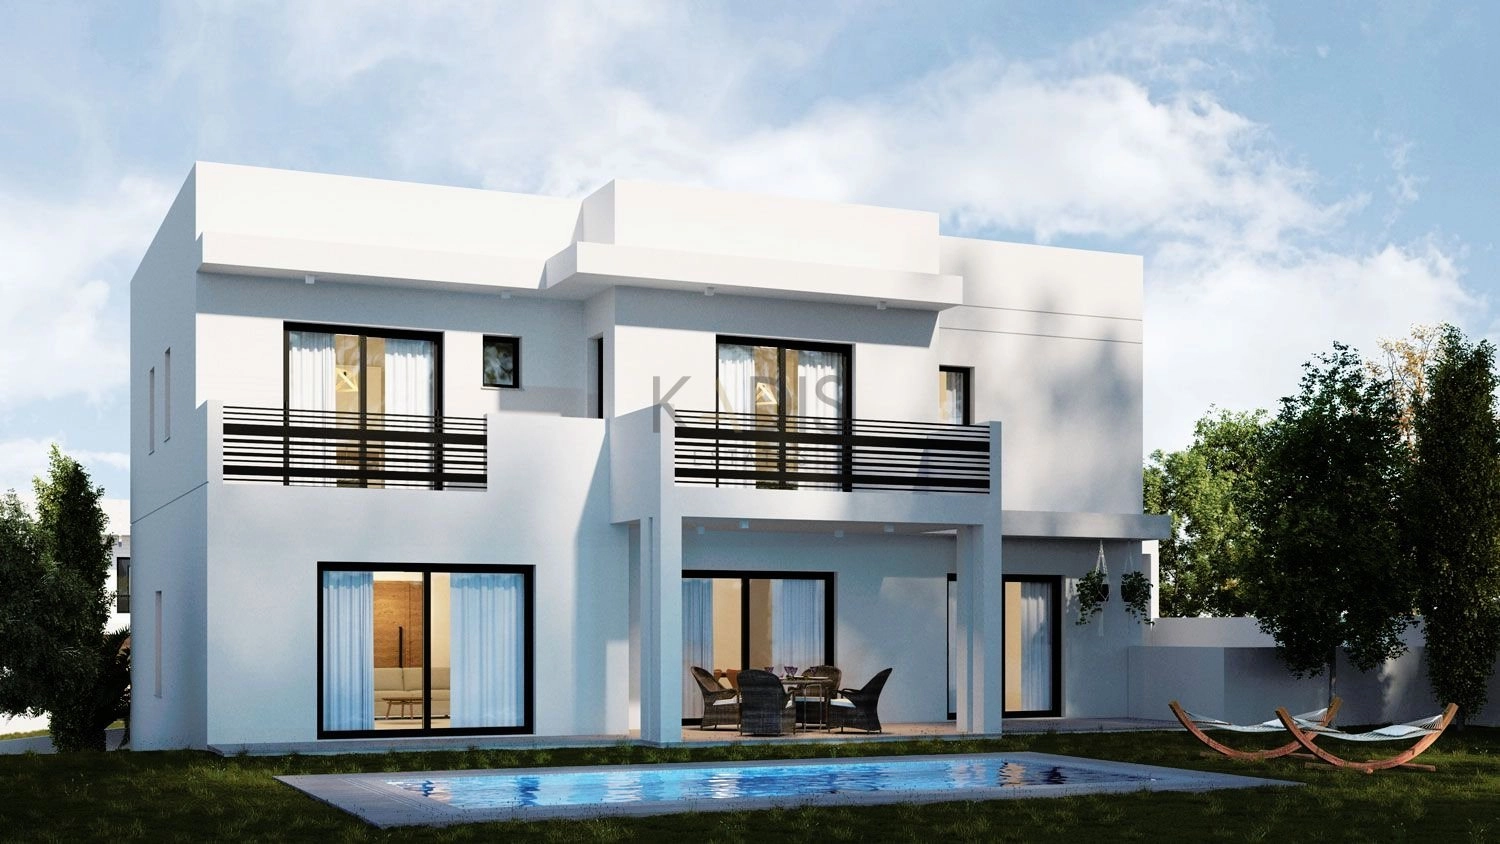 4 Bedroom House for Sale in Limassol – Agios Athanasios